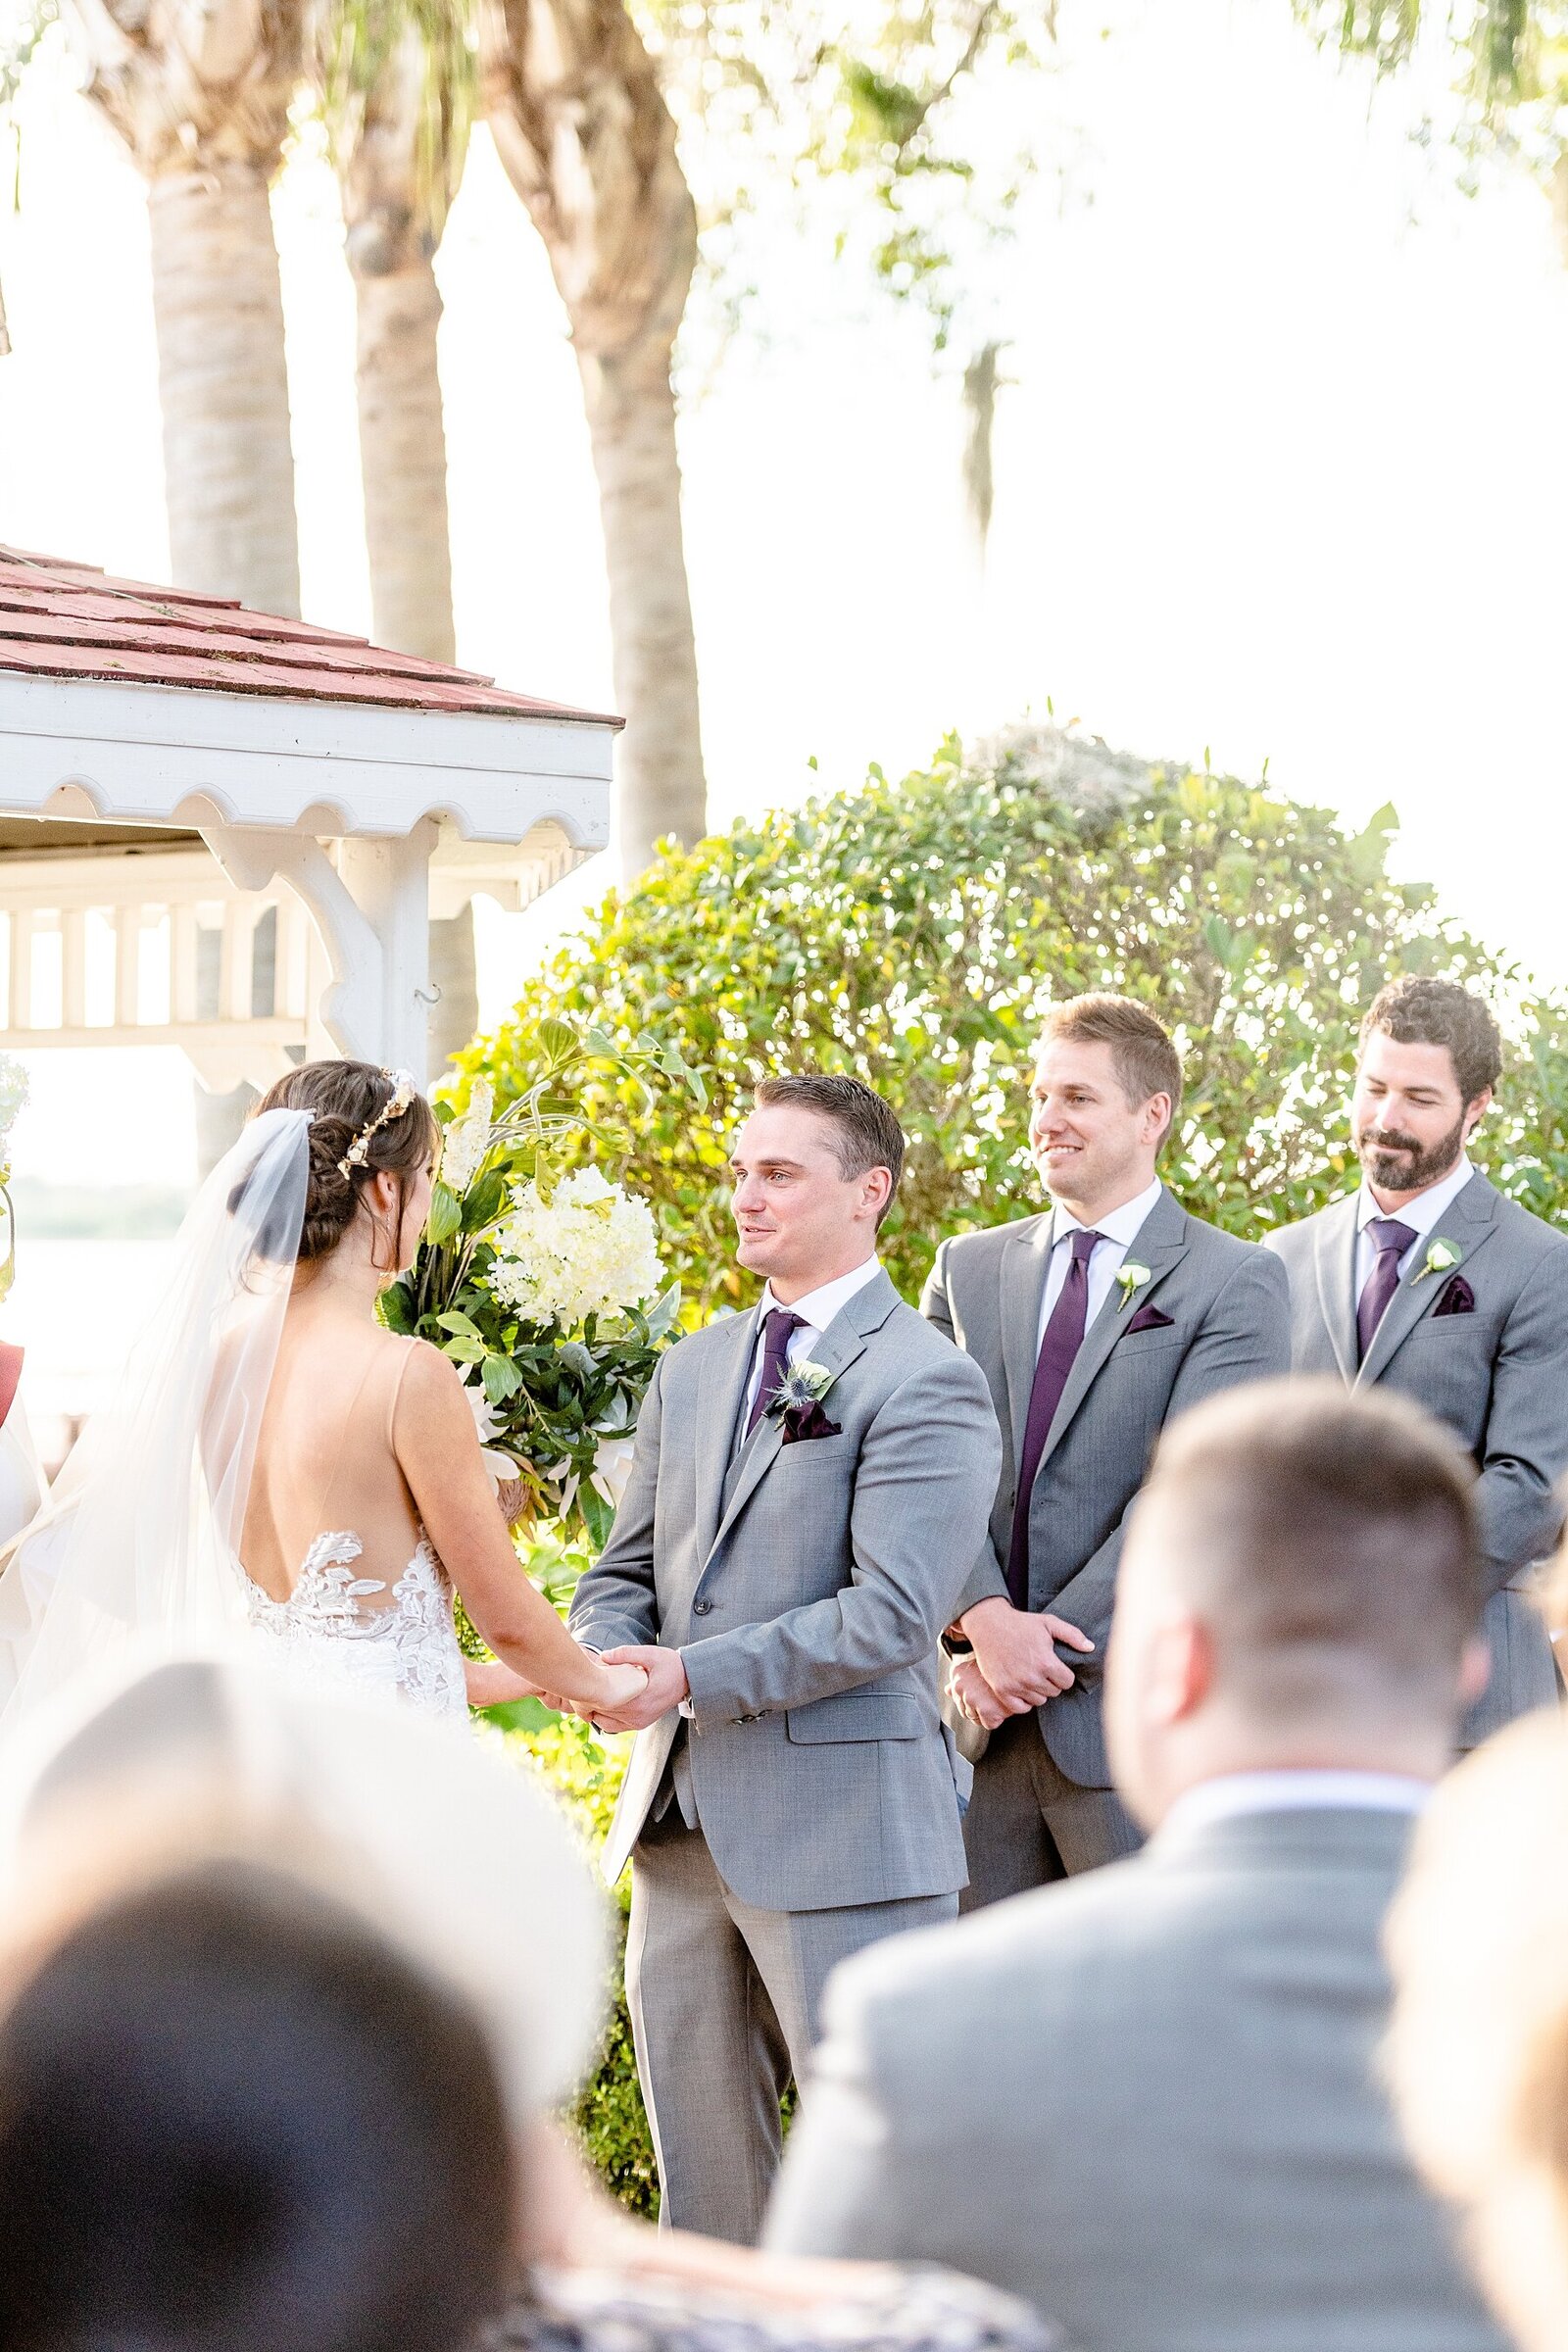 Bride and groom at ceremony | Town Manor | Chynna Pacheco Photography